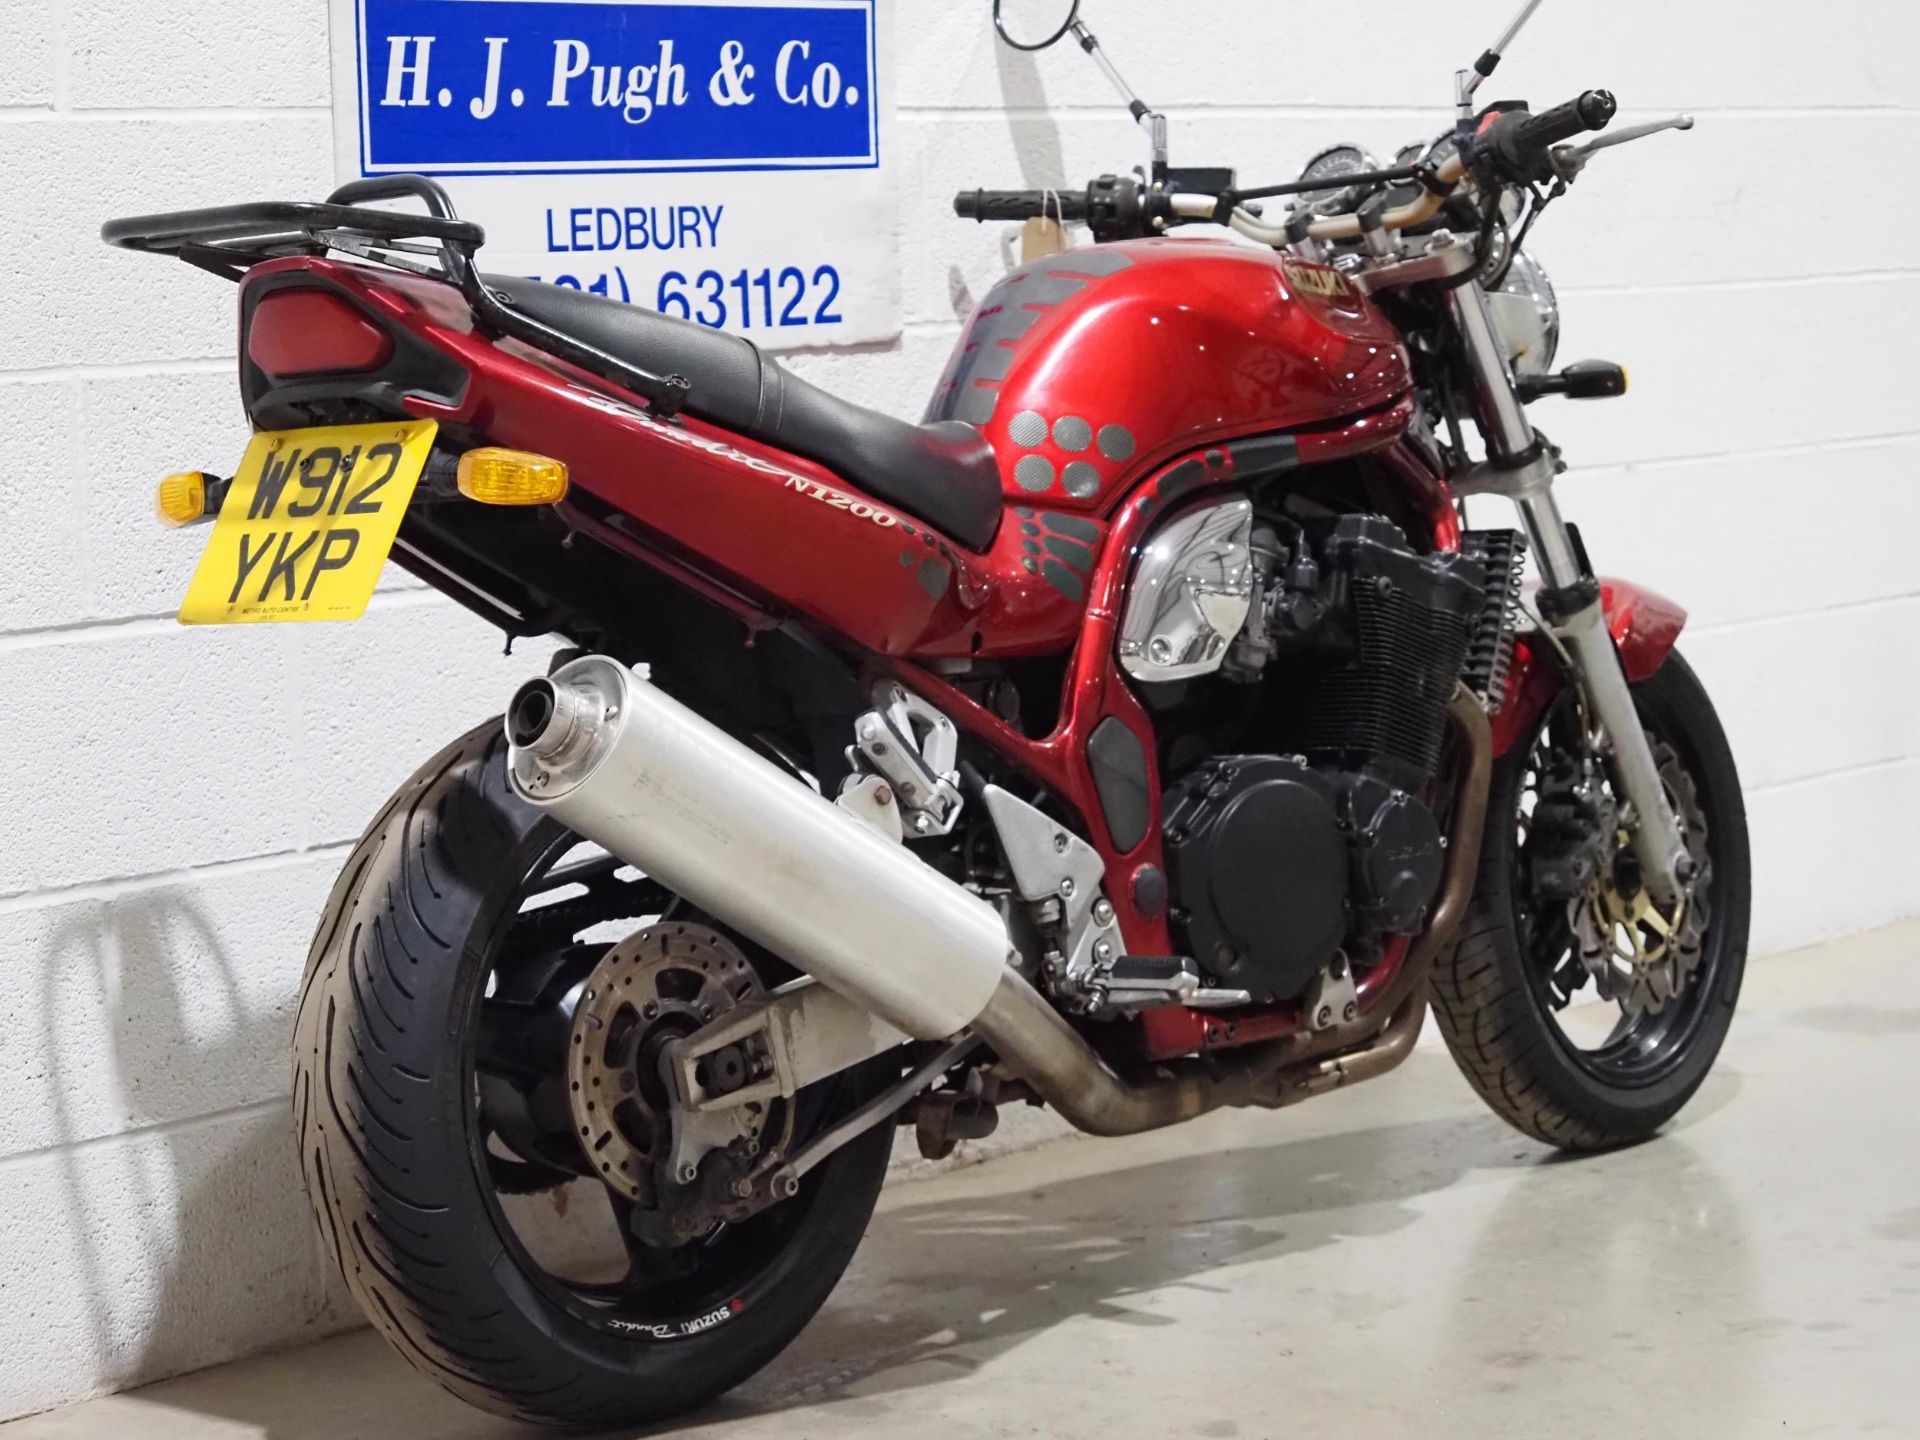 Suzuki GSF1200 Bandit motorcycle. 2000. 1157cc. Runs and rides. MOT until 01.02.05. Comes with MOT - Image 3 of 6